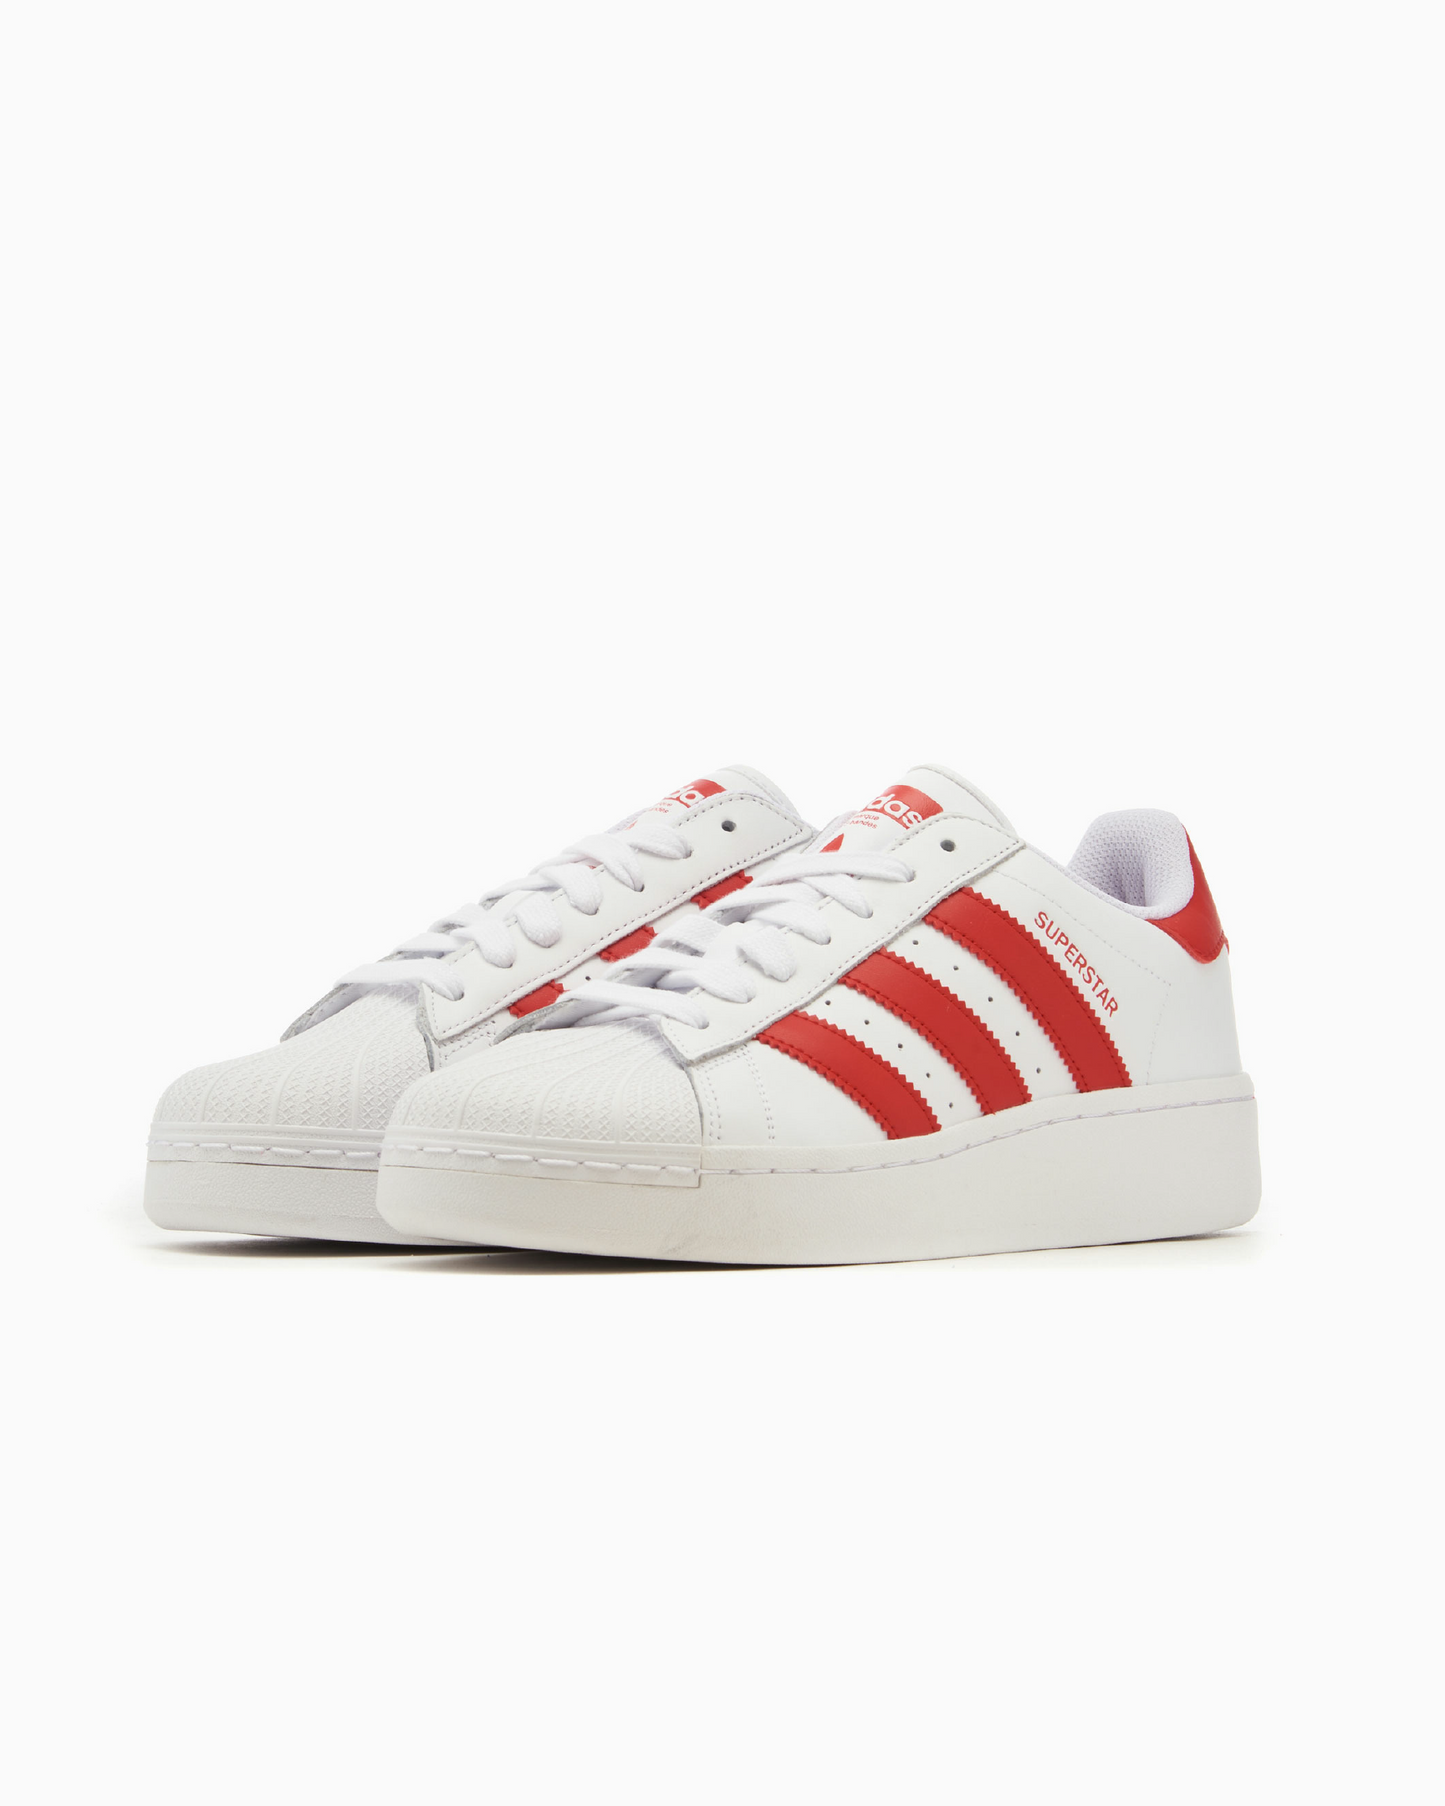 ADIDAS SUPER STAR XLG - WHITE/ RED